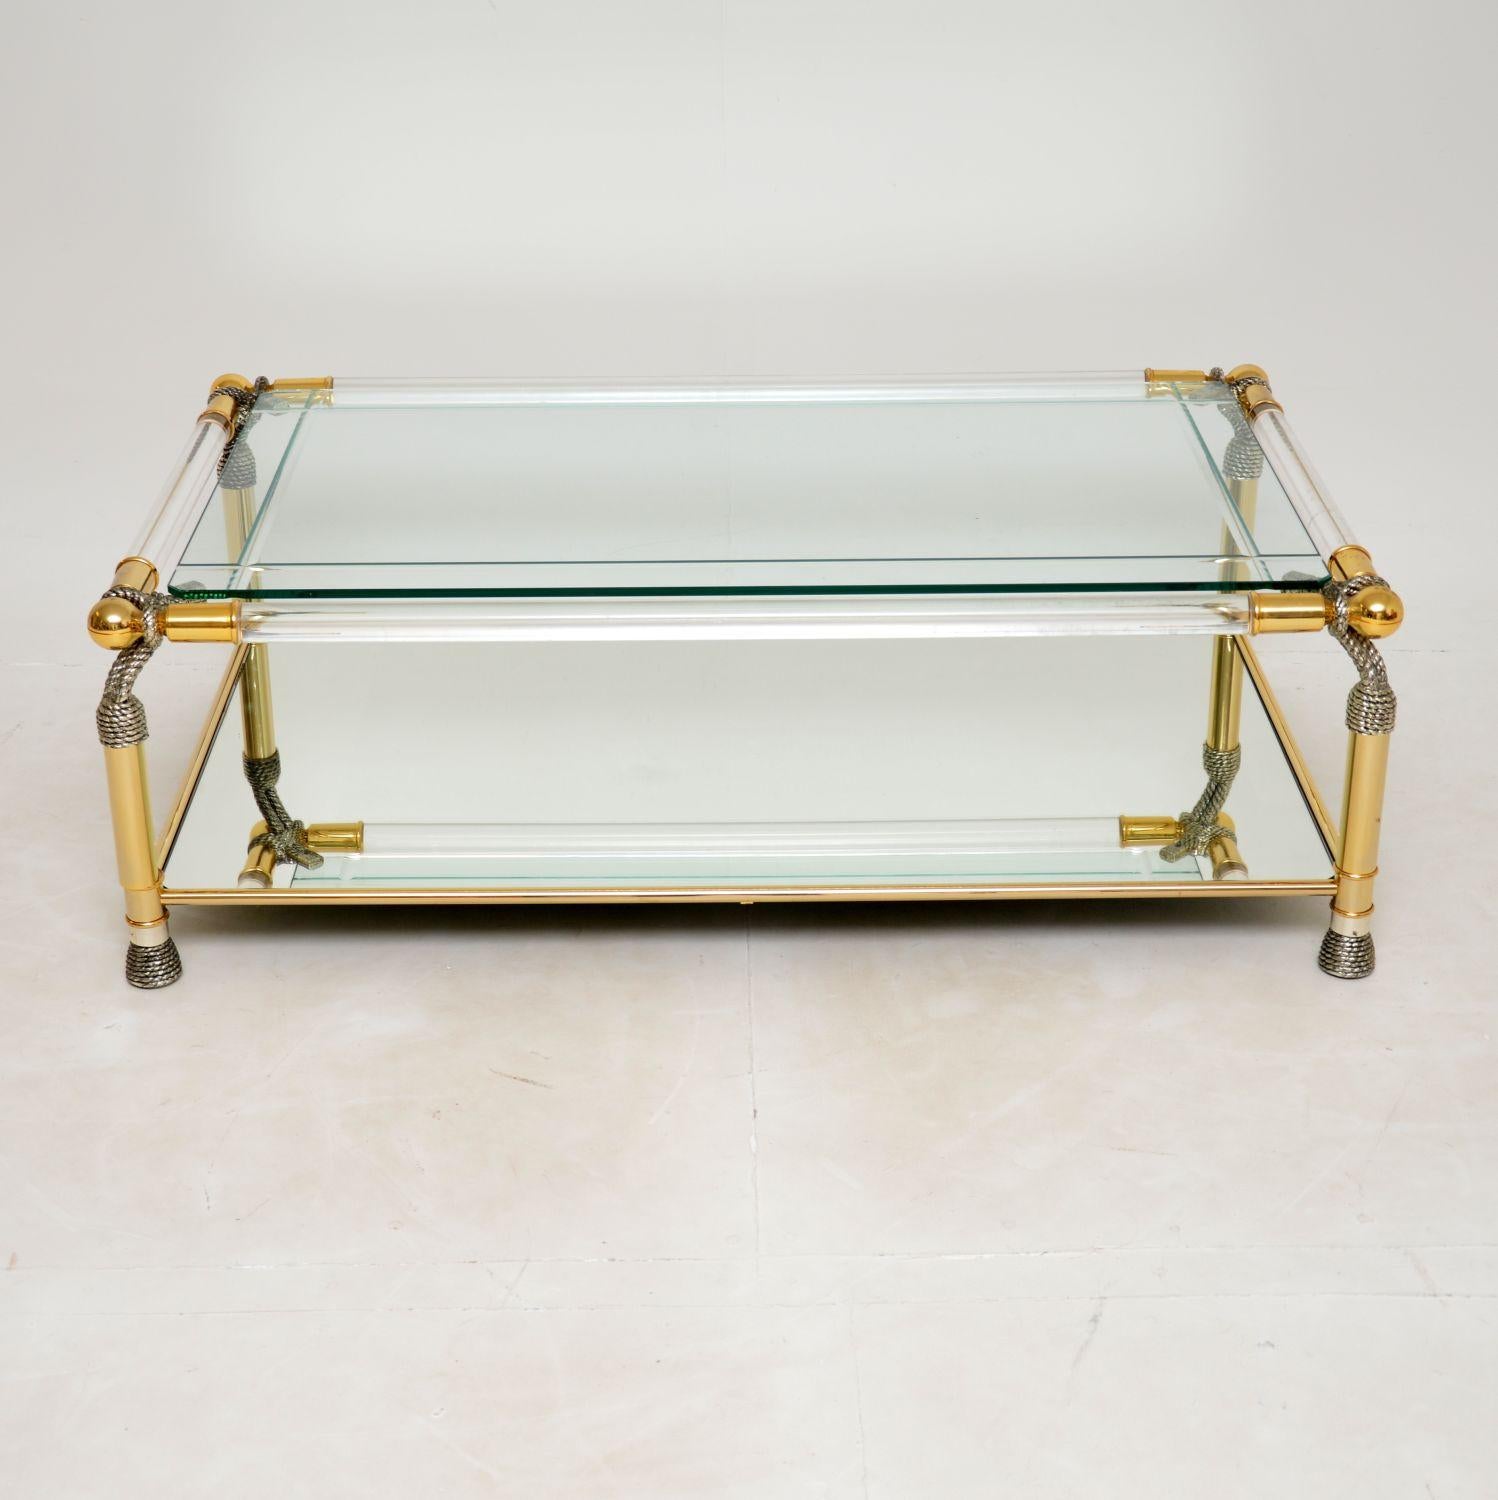 A stunning vintage decorative coffee table in clear acrylic and glass. This was made in Spain, it dates from around the 1970’s.

The quality is excellent, this is a fairly large and impressive size. The top tier is removable clear glass, the lower